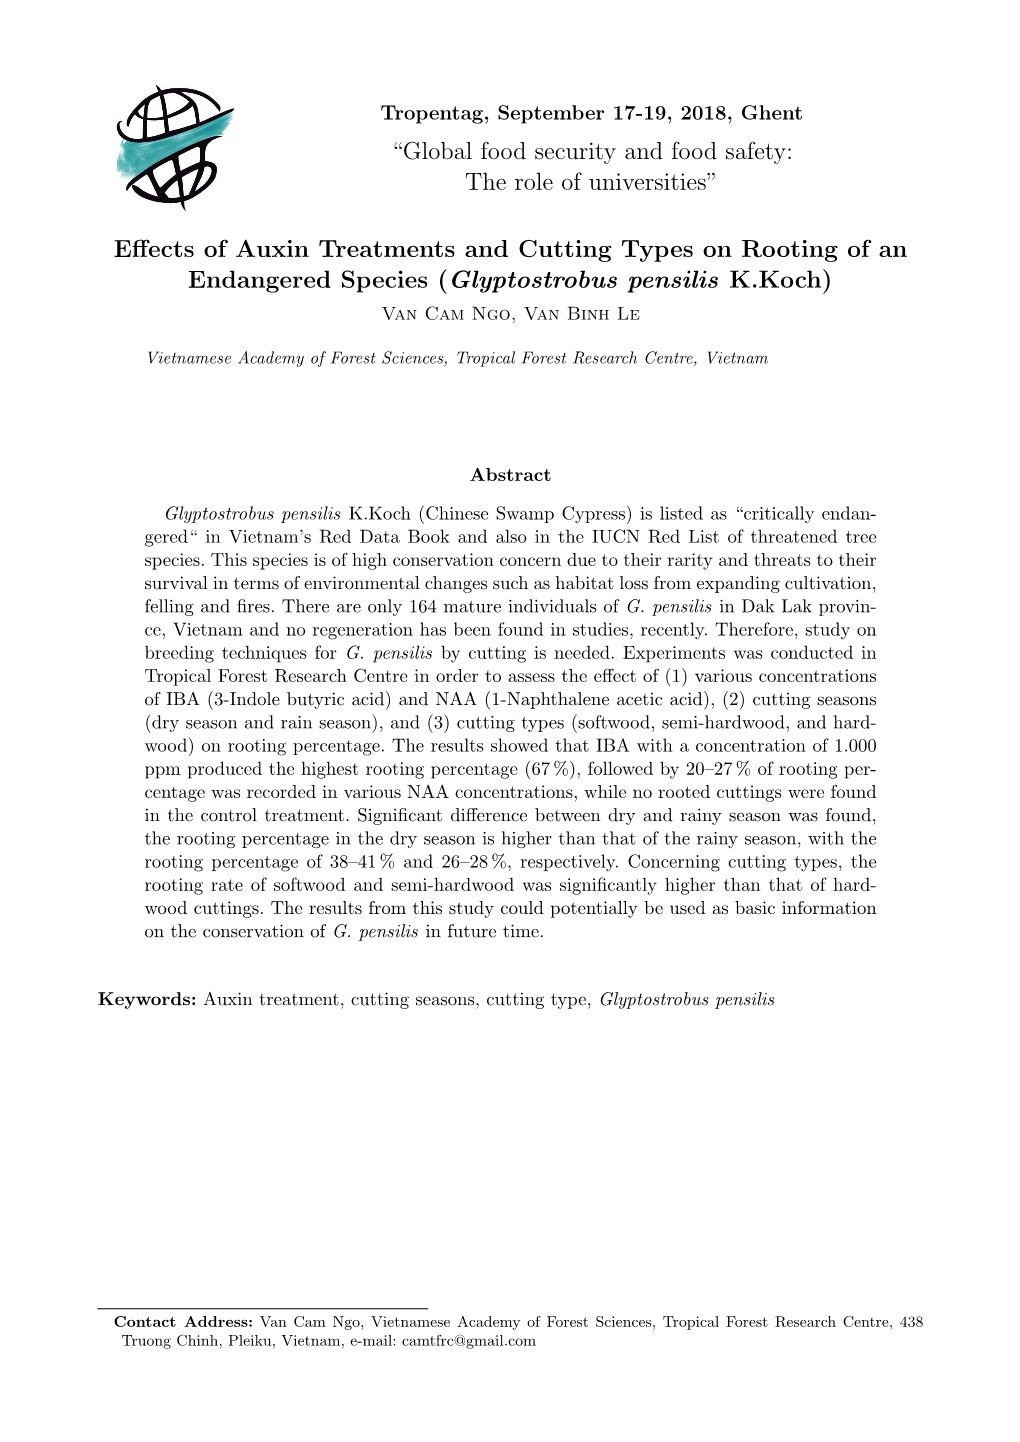 Effects of Auxin Treatments and Cutting Types on Rooting of An